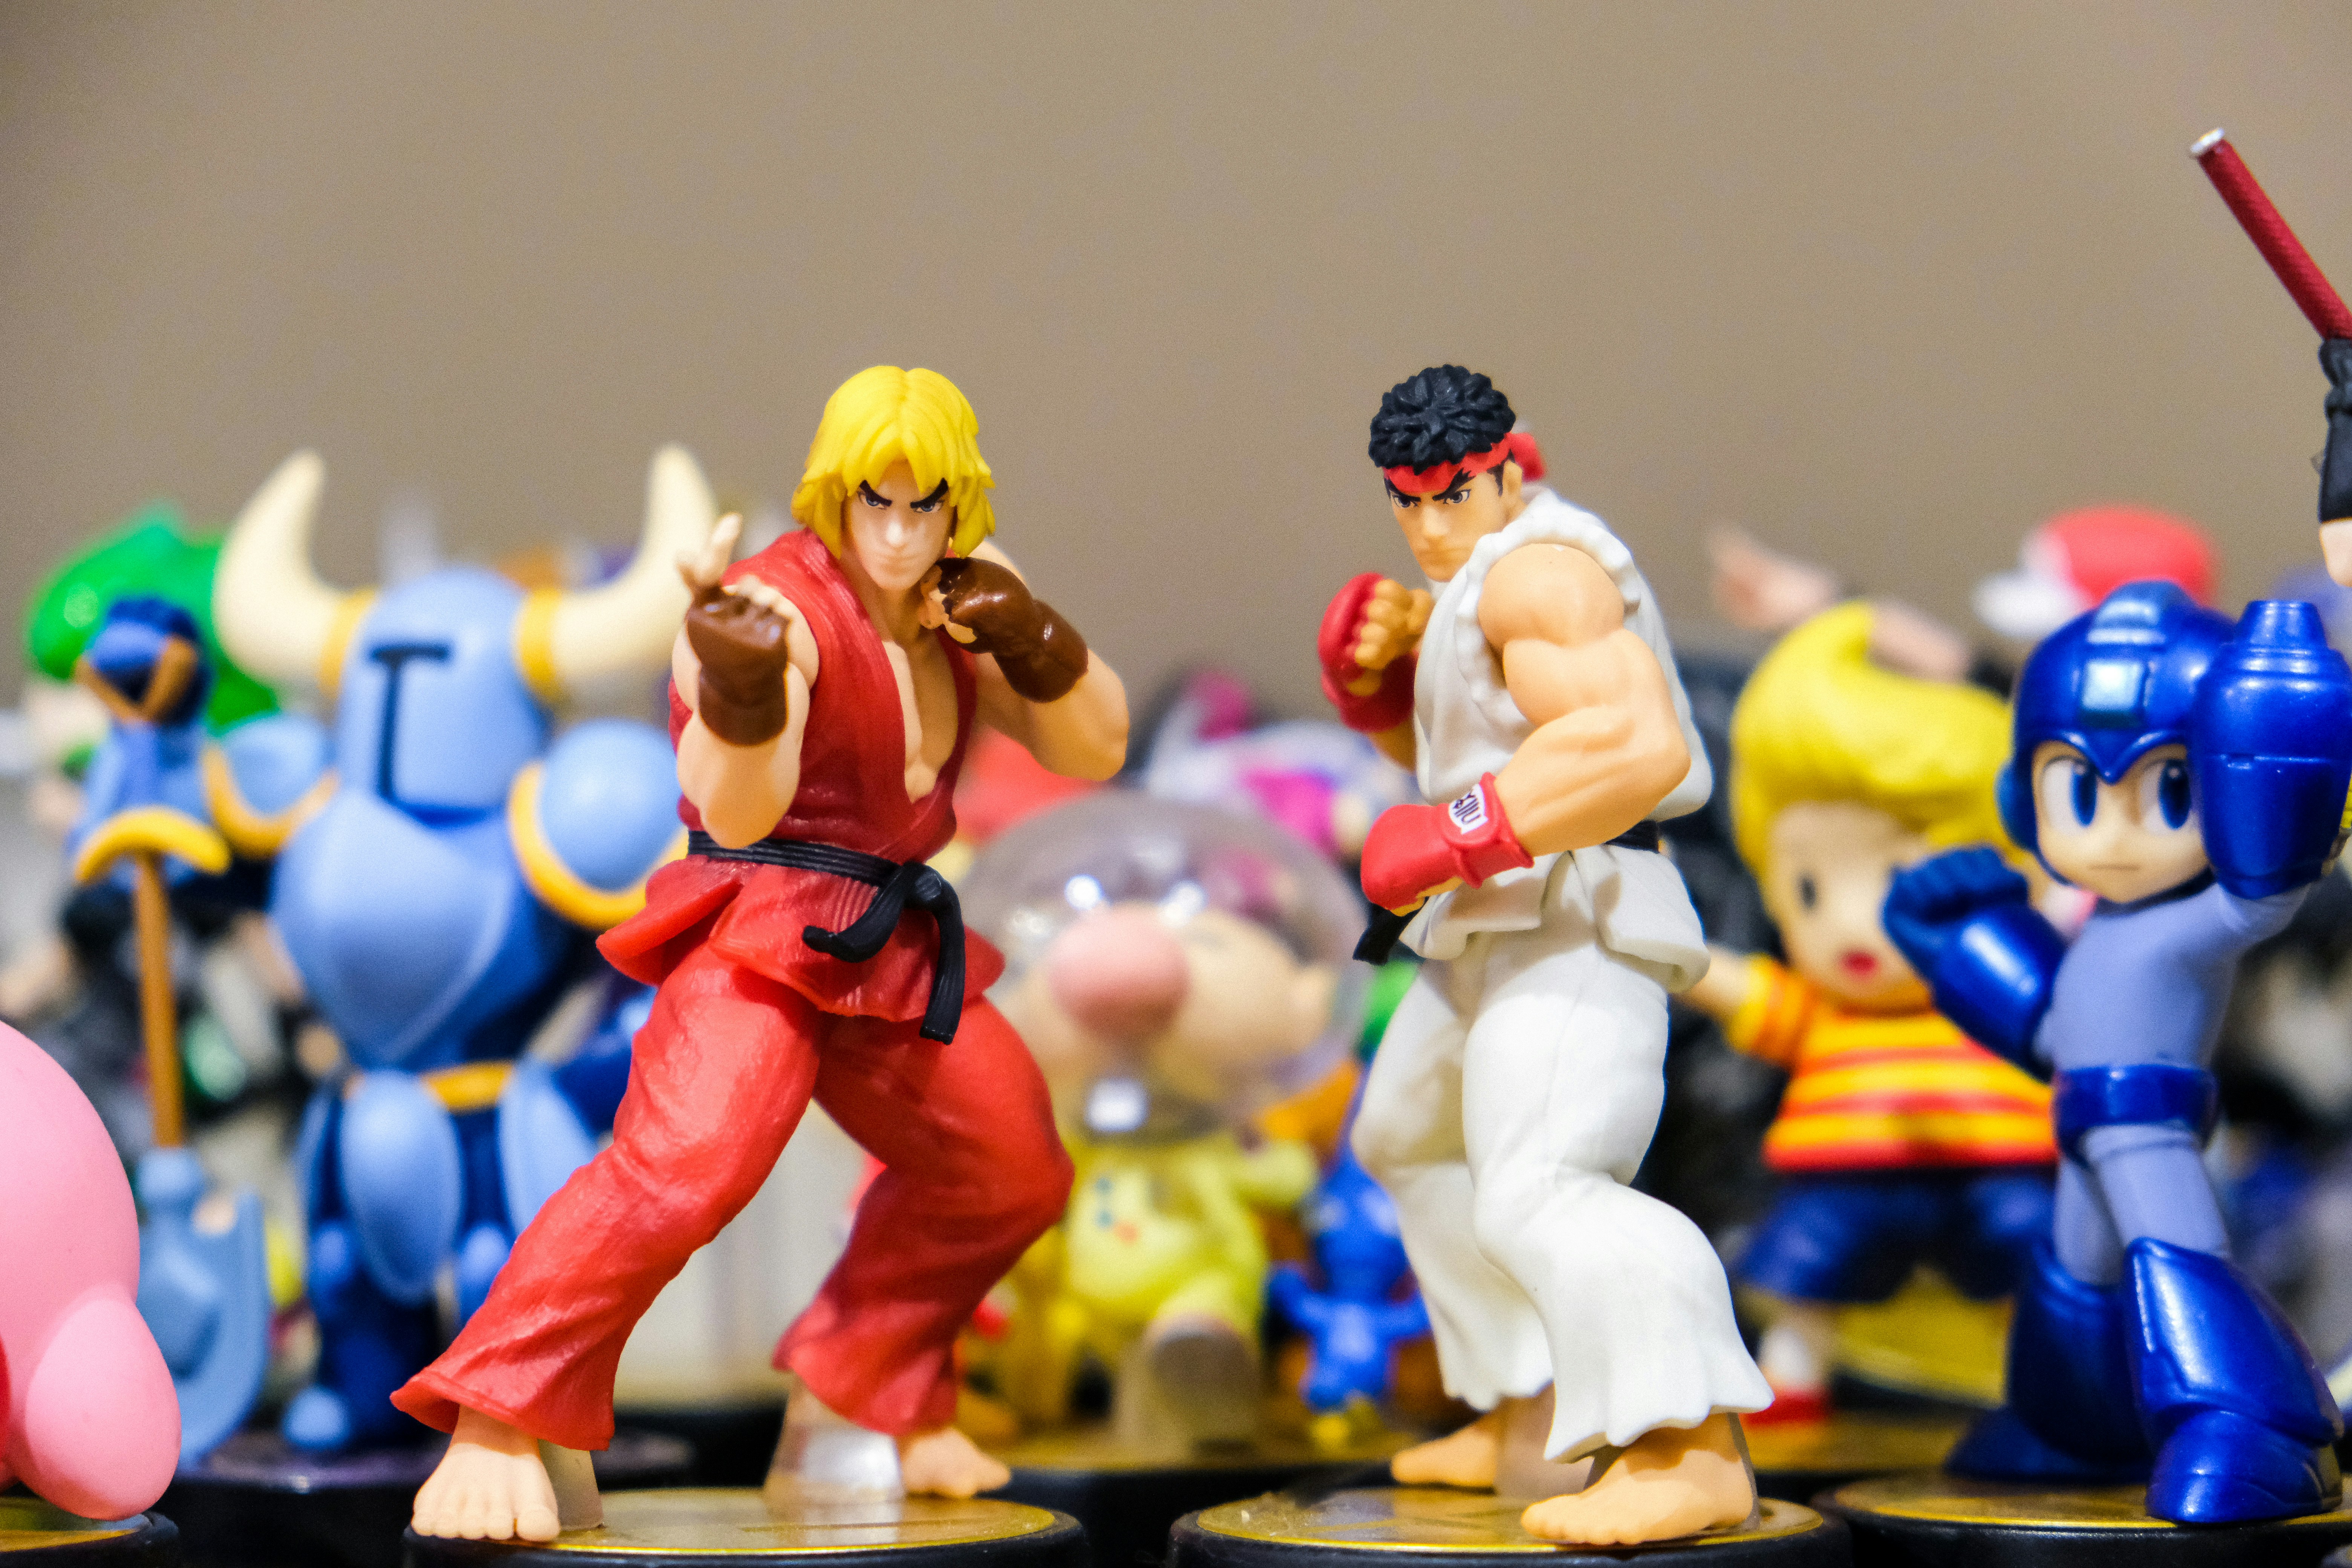 Nintendo amiibo toys of the characters Ryu and Ken from Capcom's Street Fighter, Megaman, Olimar from Pikmin, Ness from Earthbound, and Shovel Knight.